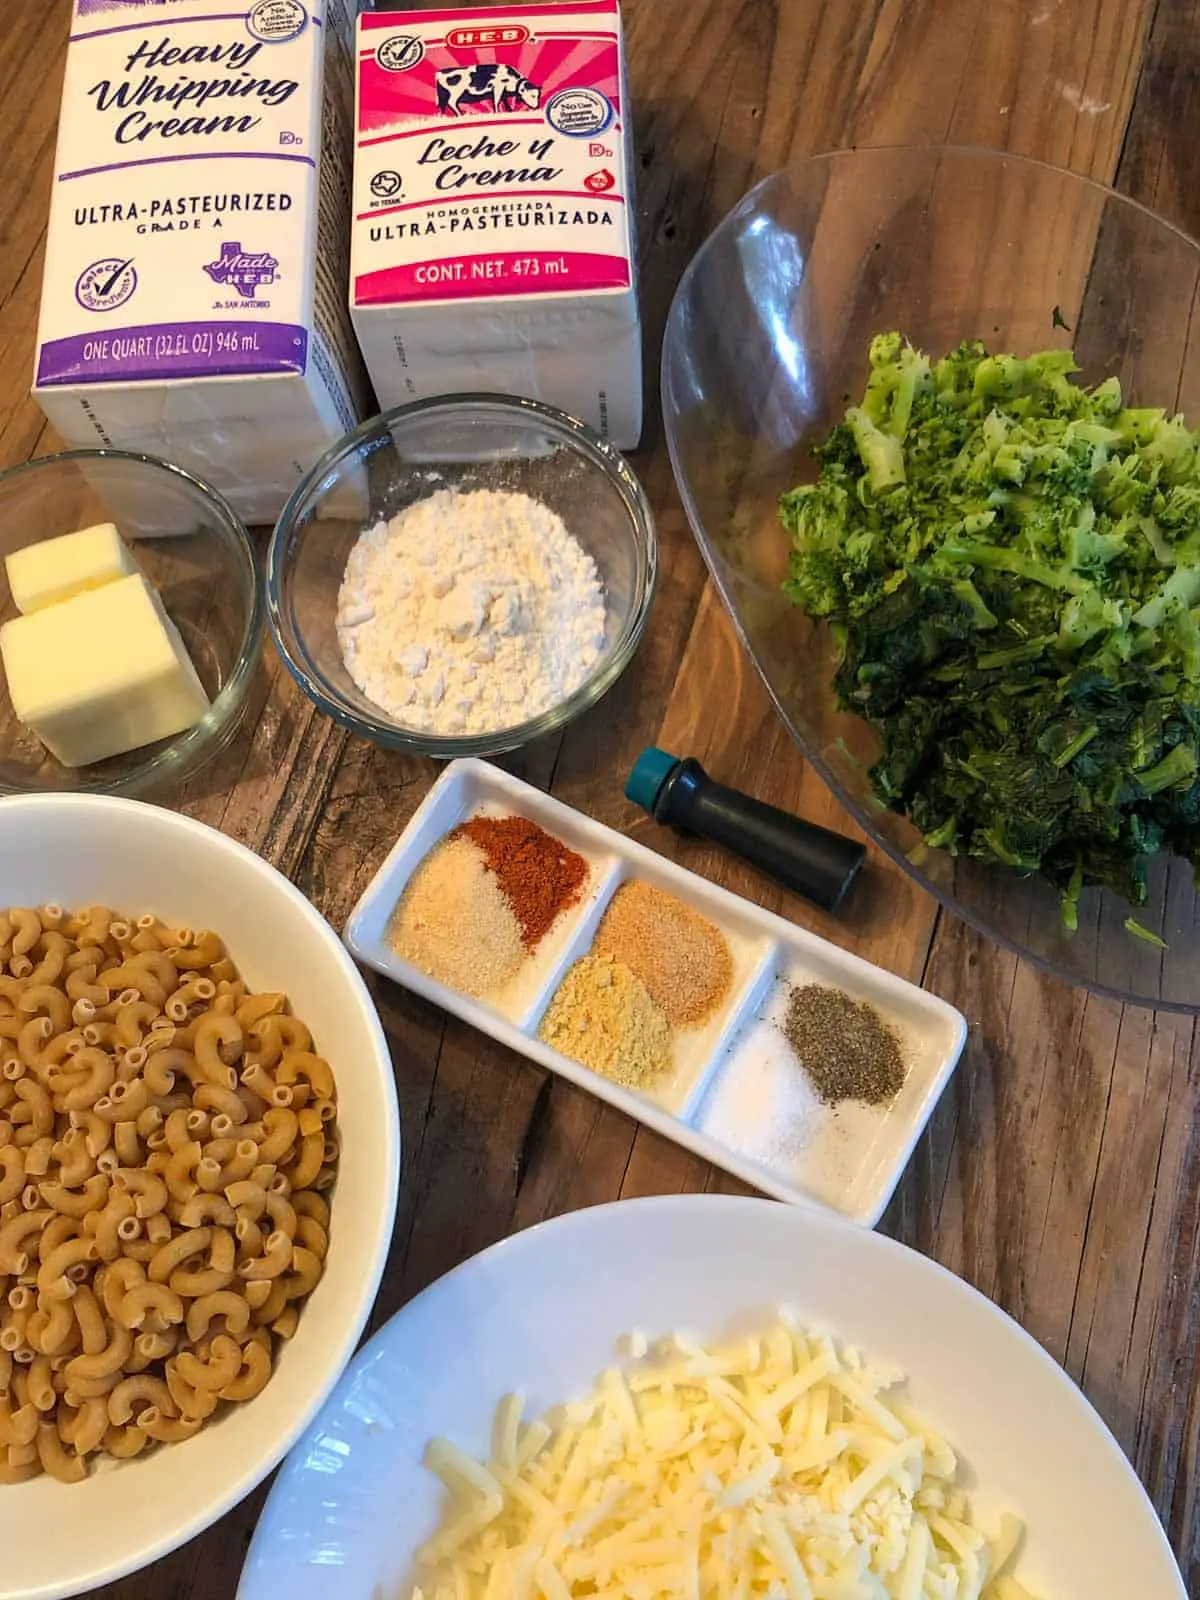 Box of heavy whipping cream, box of ½ and ½, butter in a glass dish, flour in a glass dish, chopped broccoli and chopped spinach in a dish, uncooked macaroni in a bowl, green food coloring vial, white dish with spices including cayenne pepper, onion powder, garlic powder, dry mustard, salt and pepper, white bowl with shredded white cheddar cheese.